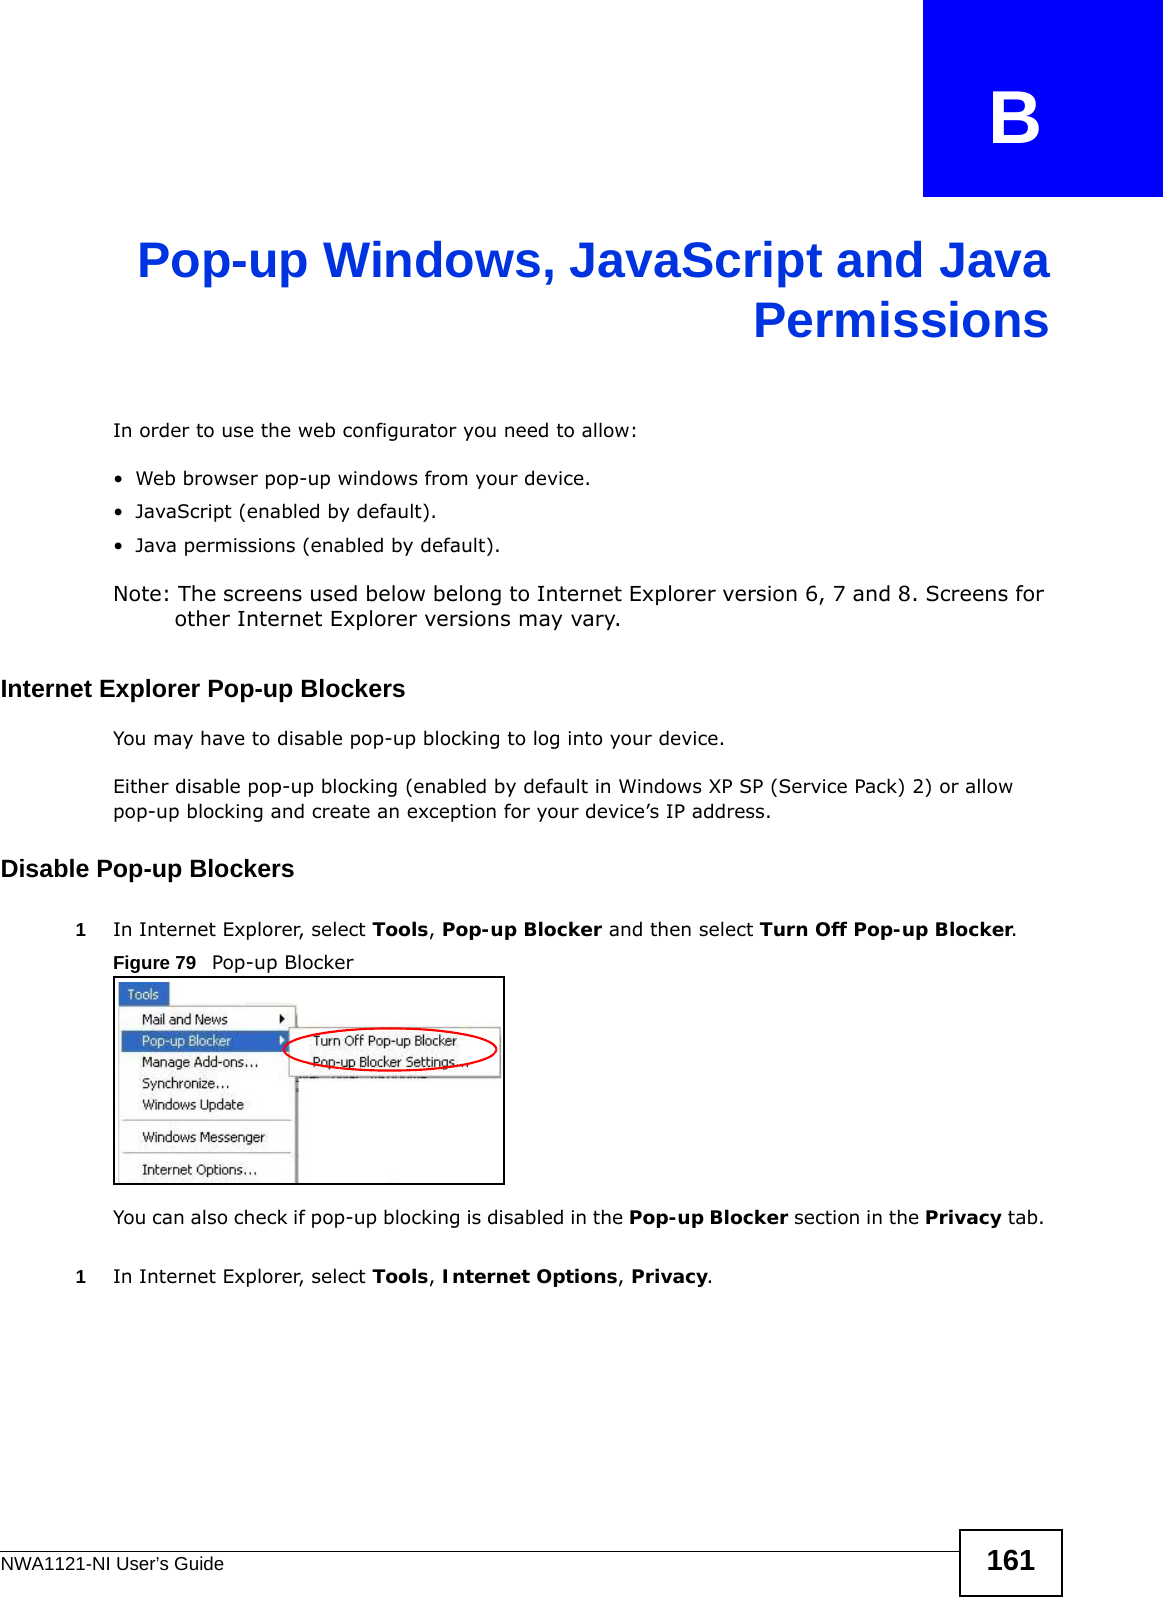 NWA1121-NI User’s Guide 161APPENDIX   BPop-up Windows, JavaScript and JavaPermissionsIn order to use the web configurator you need to allow:• Web browser pop-up windows from your device.• JavaScript (enabled by default).• Java permissions (enabled by default).Note: The screens used below belong to Internet Explorer version 6, 7 and 8. Screens for other Internet Explorer versions may vary.Internet Explorer Pop-up BlockersYou may have to disable pop-up blocking to log into your device. Either disable pop-up blocking (enabled by default in Windows XP SP (Service Pack) 2) or allow pop-up blocking and create an exception for your device’s IP address.Disable Pop-up Blockers1In Internet Explorer, select Tools, Pop-up Blocker and then select Turn Off Pop-up Blocker. Figure 79   Pop-up BlockerYou can also check if pop-up blocking is disabled in the Pop-up Blocker section in the Privacy tab. 1In Internet Explorer, select Tools, Internet Options, Privacy.